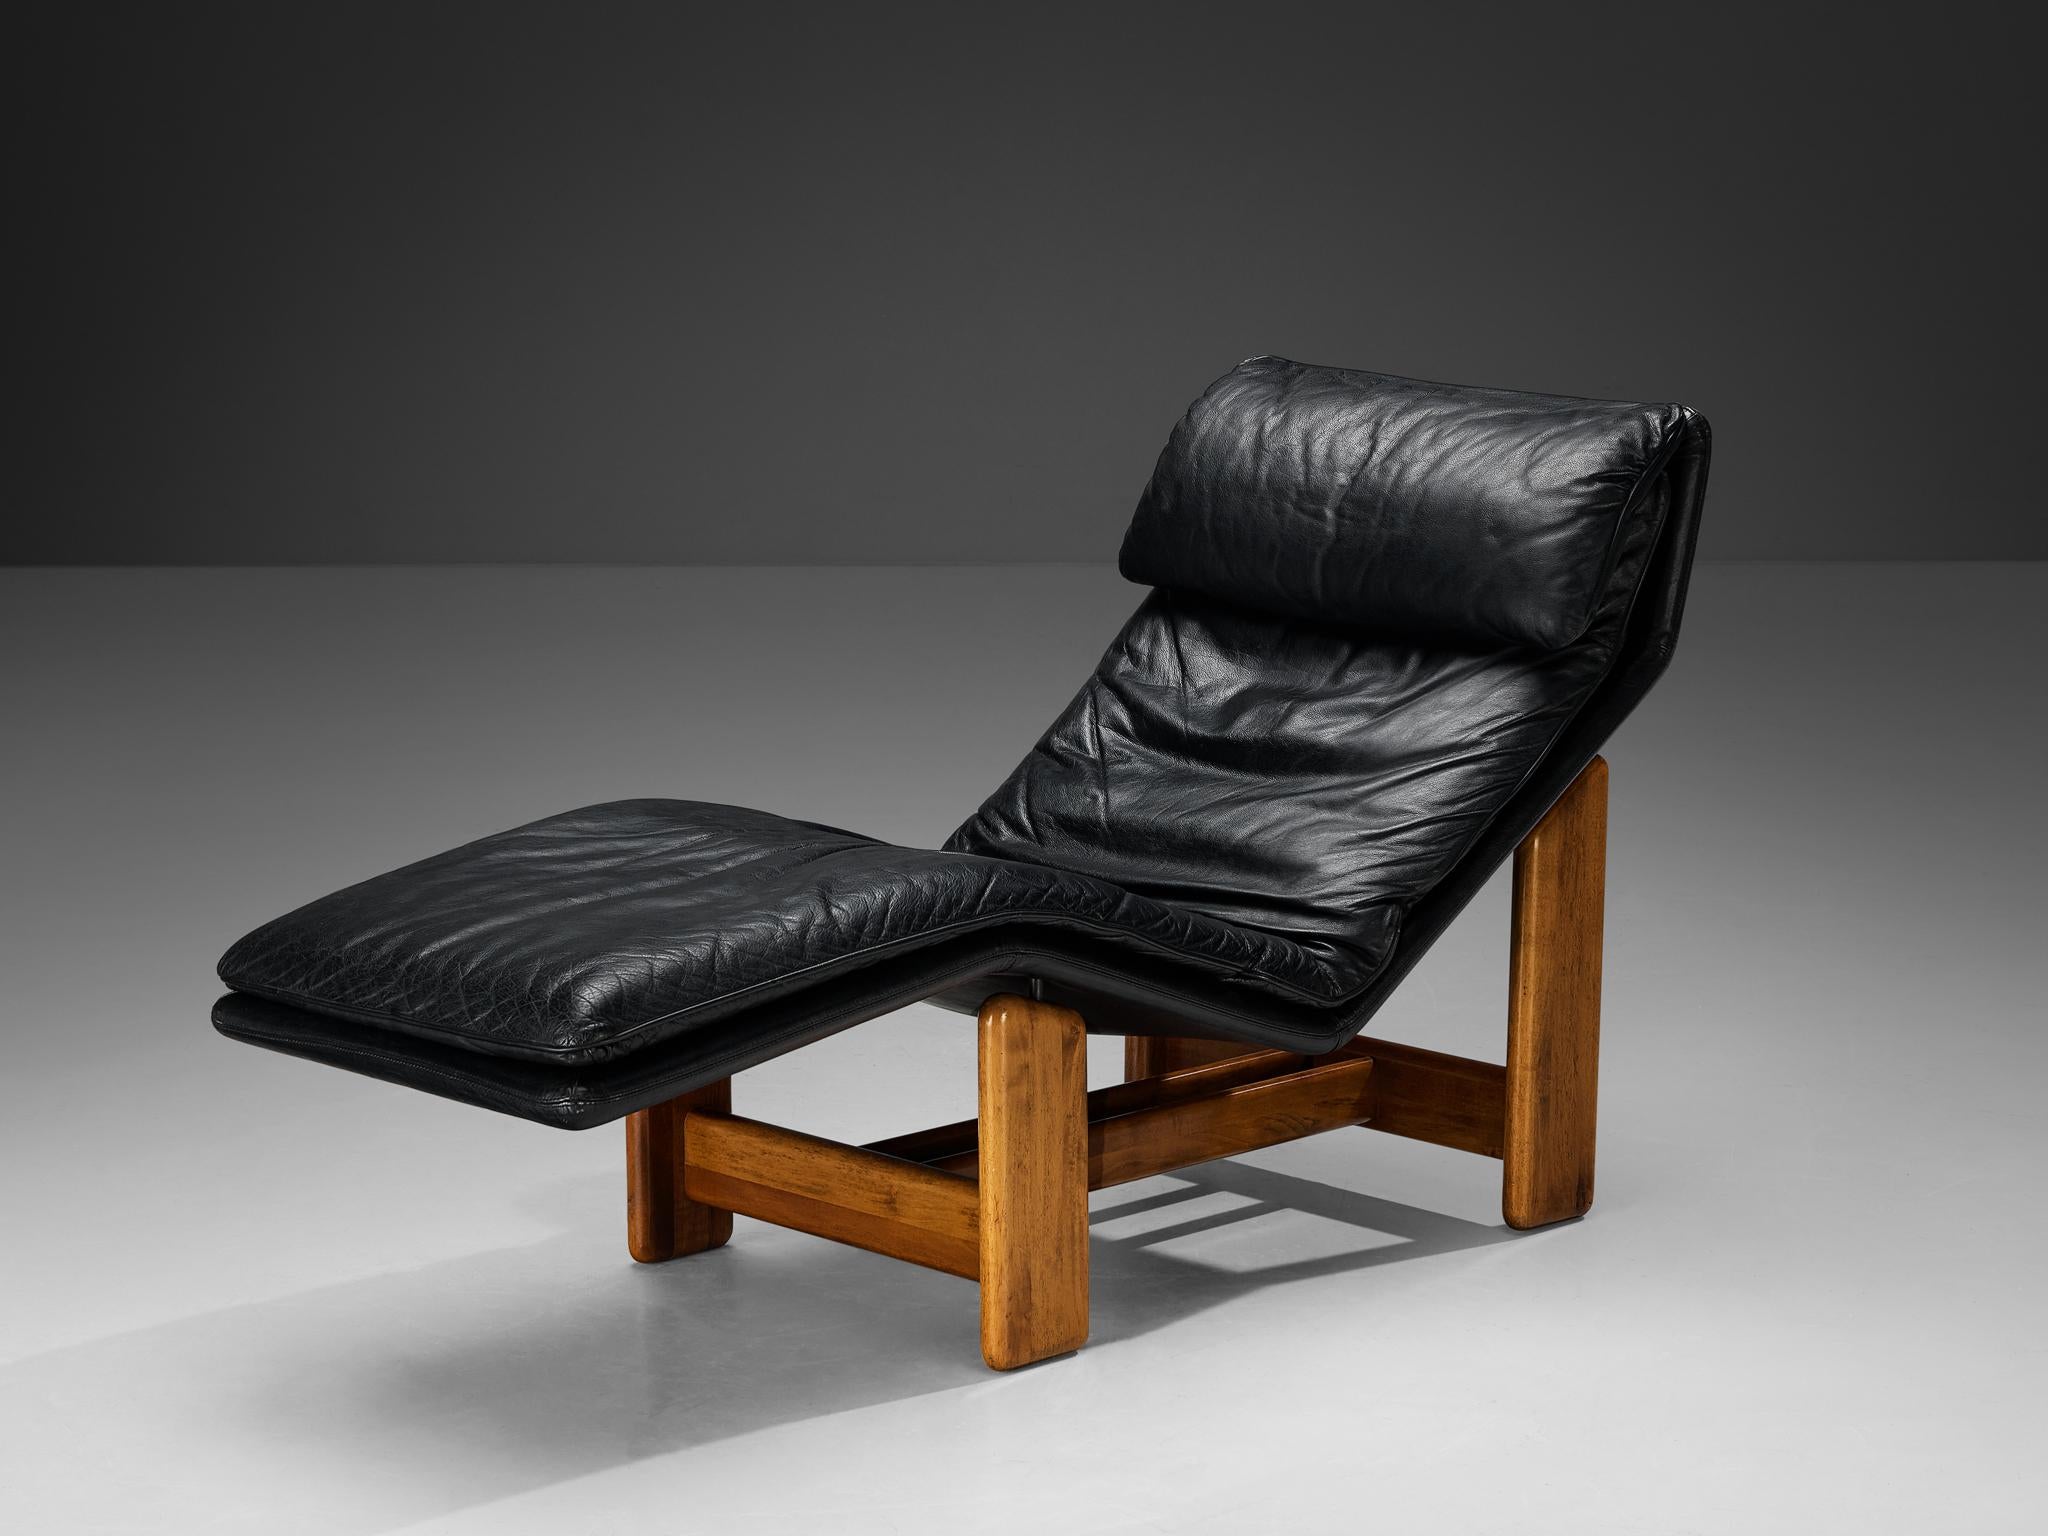 Tarcisio Colzani for Mobil Girgi, daybed or chaise longue, model 'Periplo', walnut, leather, Italy, 1970s

Sculptural chaise longue designed by Tarcisio Colzani for Mobil Girgi in the 1970s. This piece is upholstered in black leather, that displays